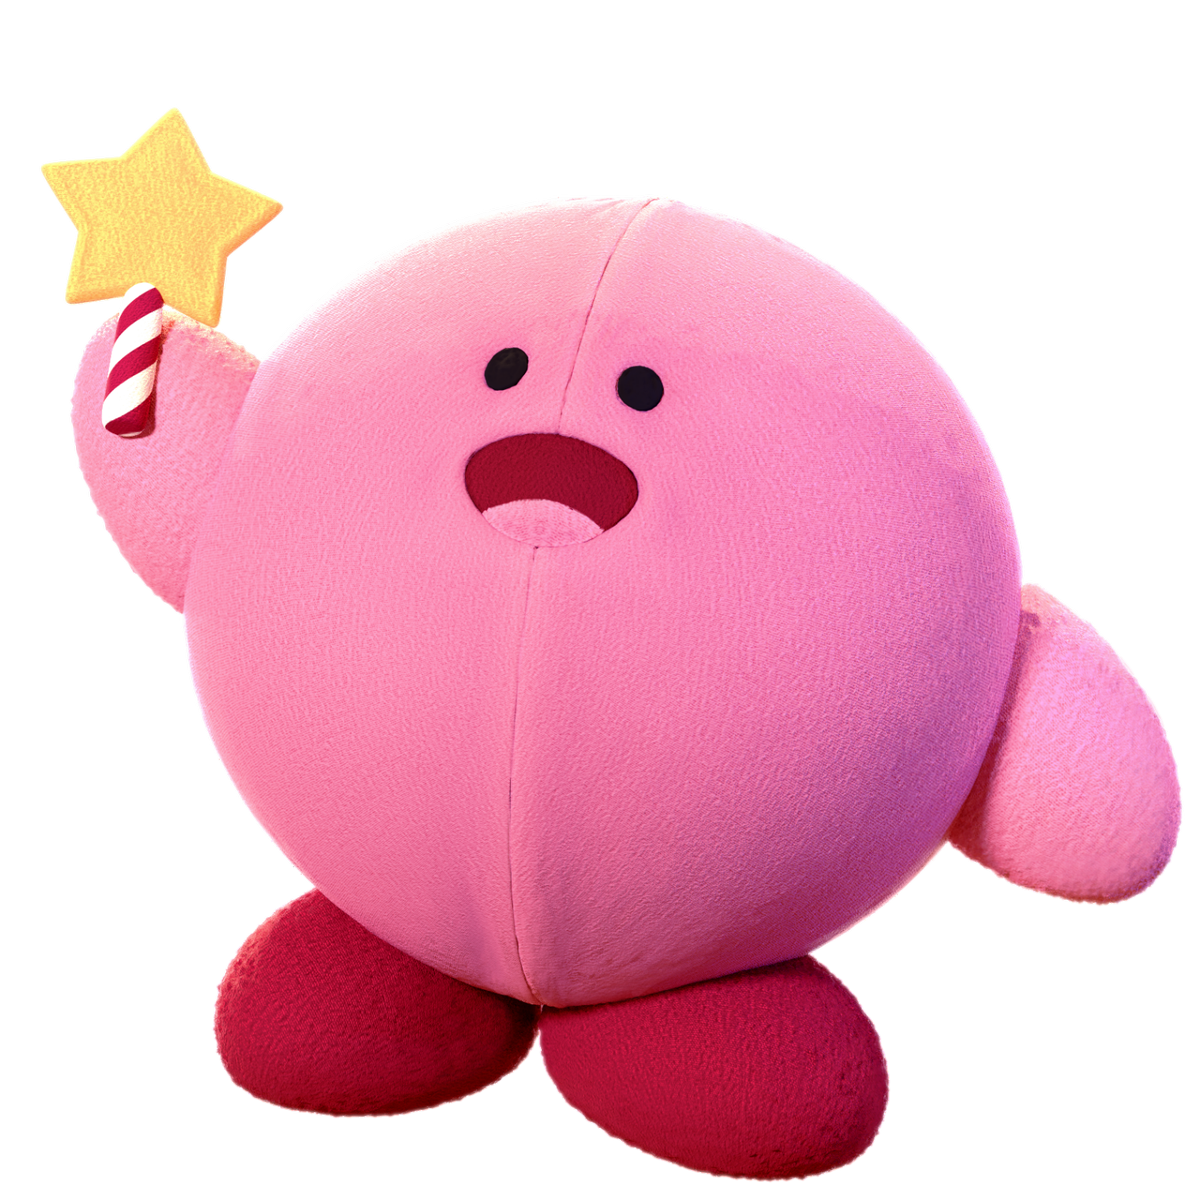 This peluche of Kirby Is original? : r/Kirby